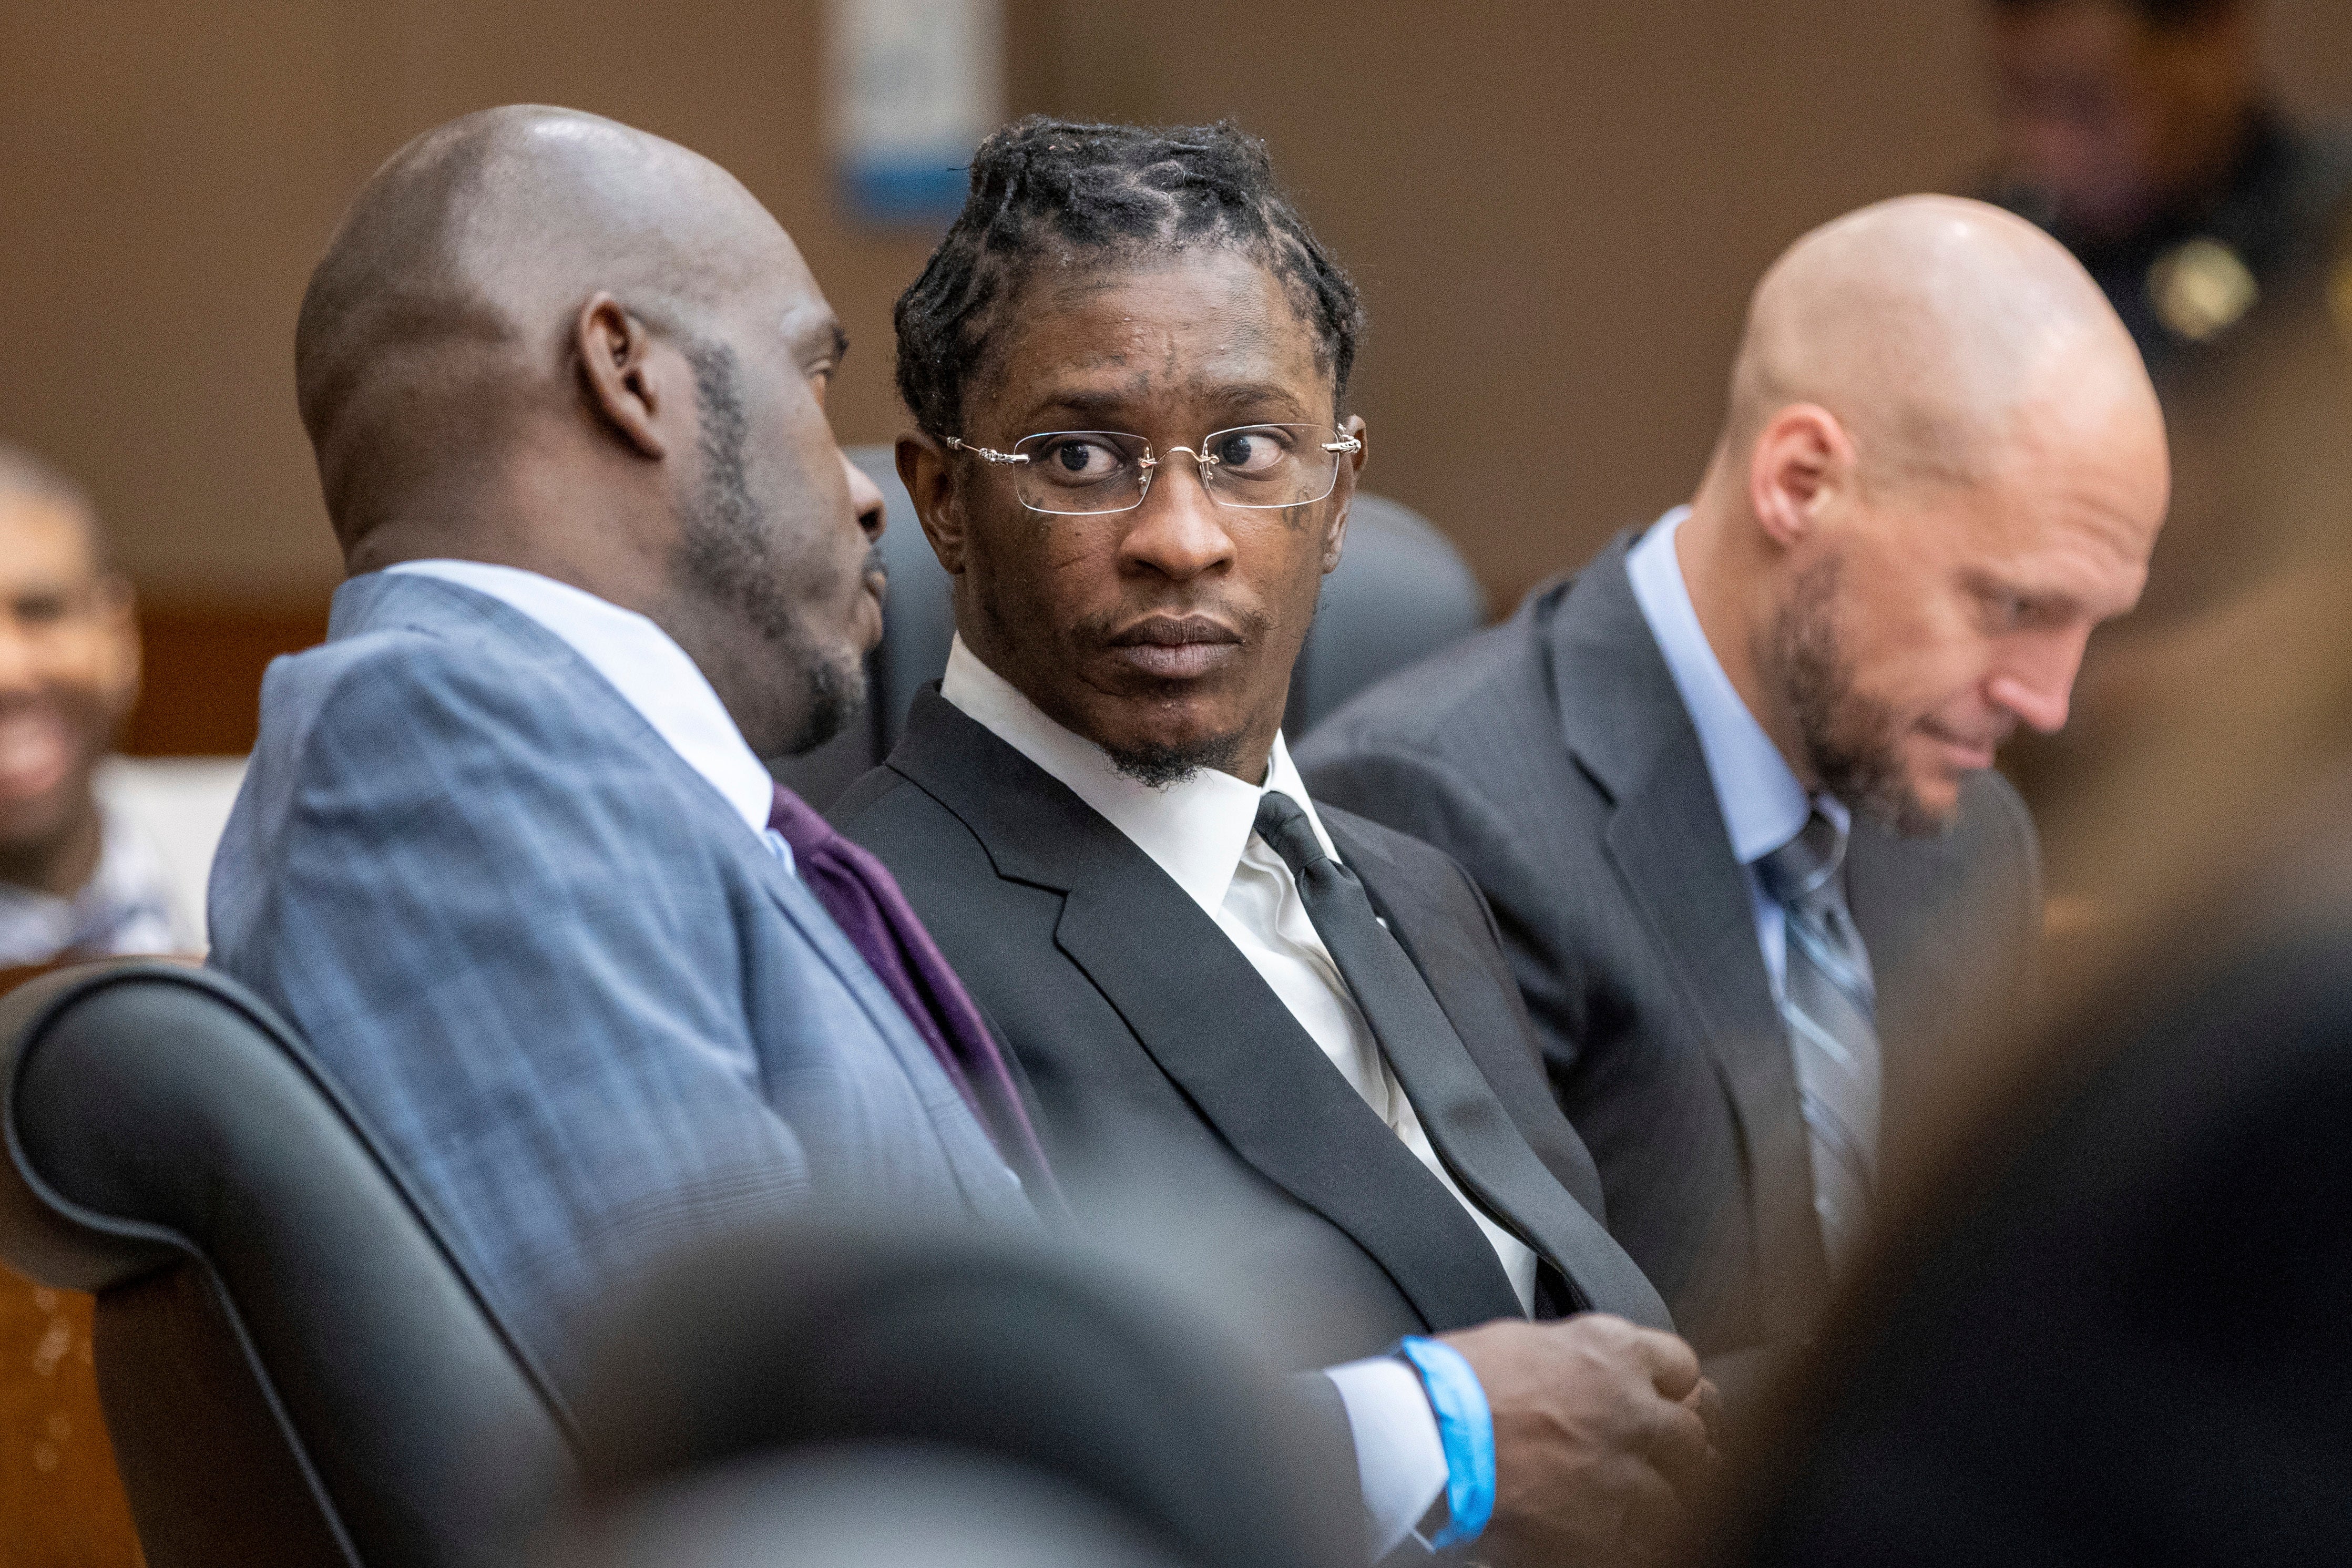 Young Thug: The chart-topping rapper on trial in Georgia